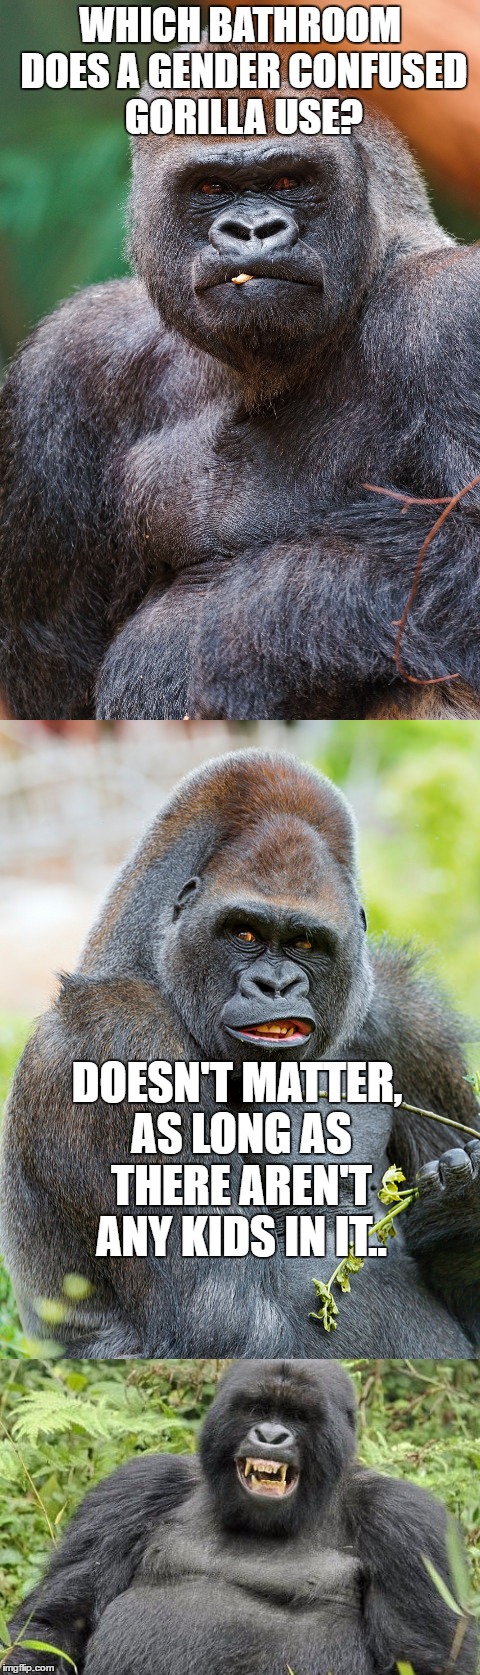 Bad Pun Gorilla  | WHICH BATHROOM DOES A GENDER CONFUSED GORILLA USE? DOESN'T MATTER, AS LONG AS THERE AREN'T ANY KIDS IN IT.. | image tagged in bad pun gorilla,memes,lol,lynch1979,gorilla | made w/ Imgflip meme maker